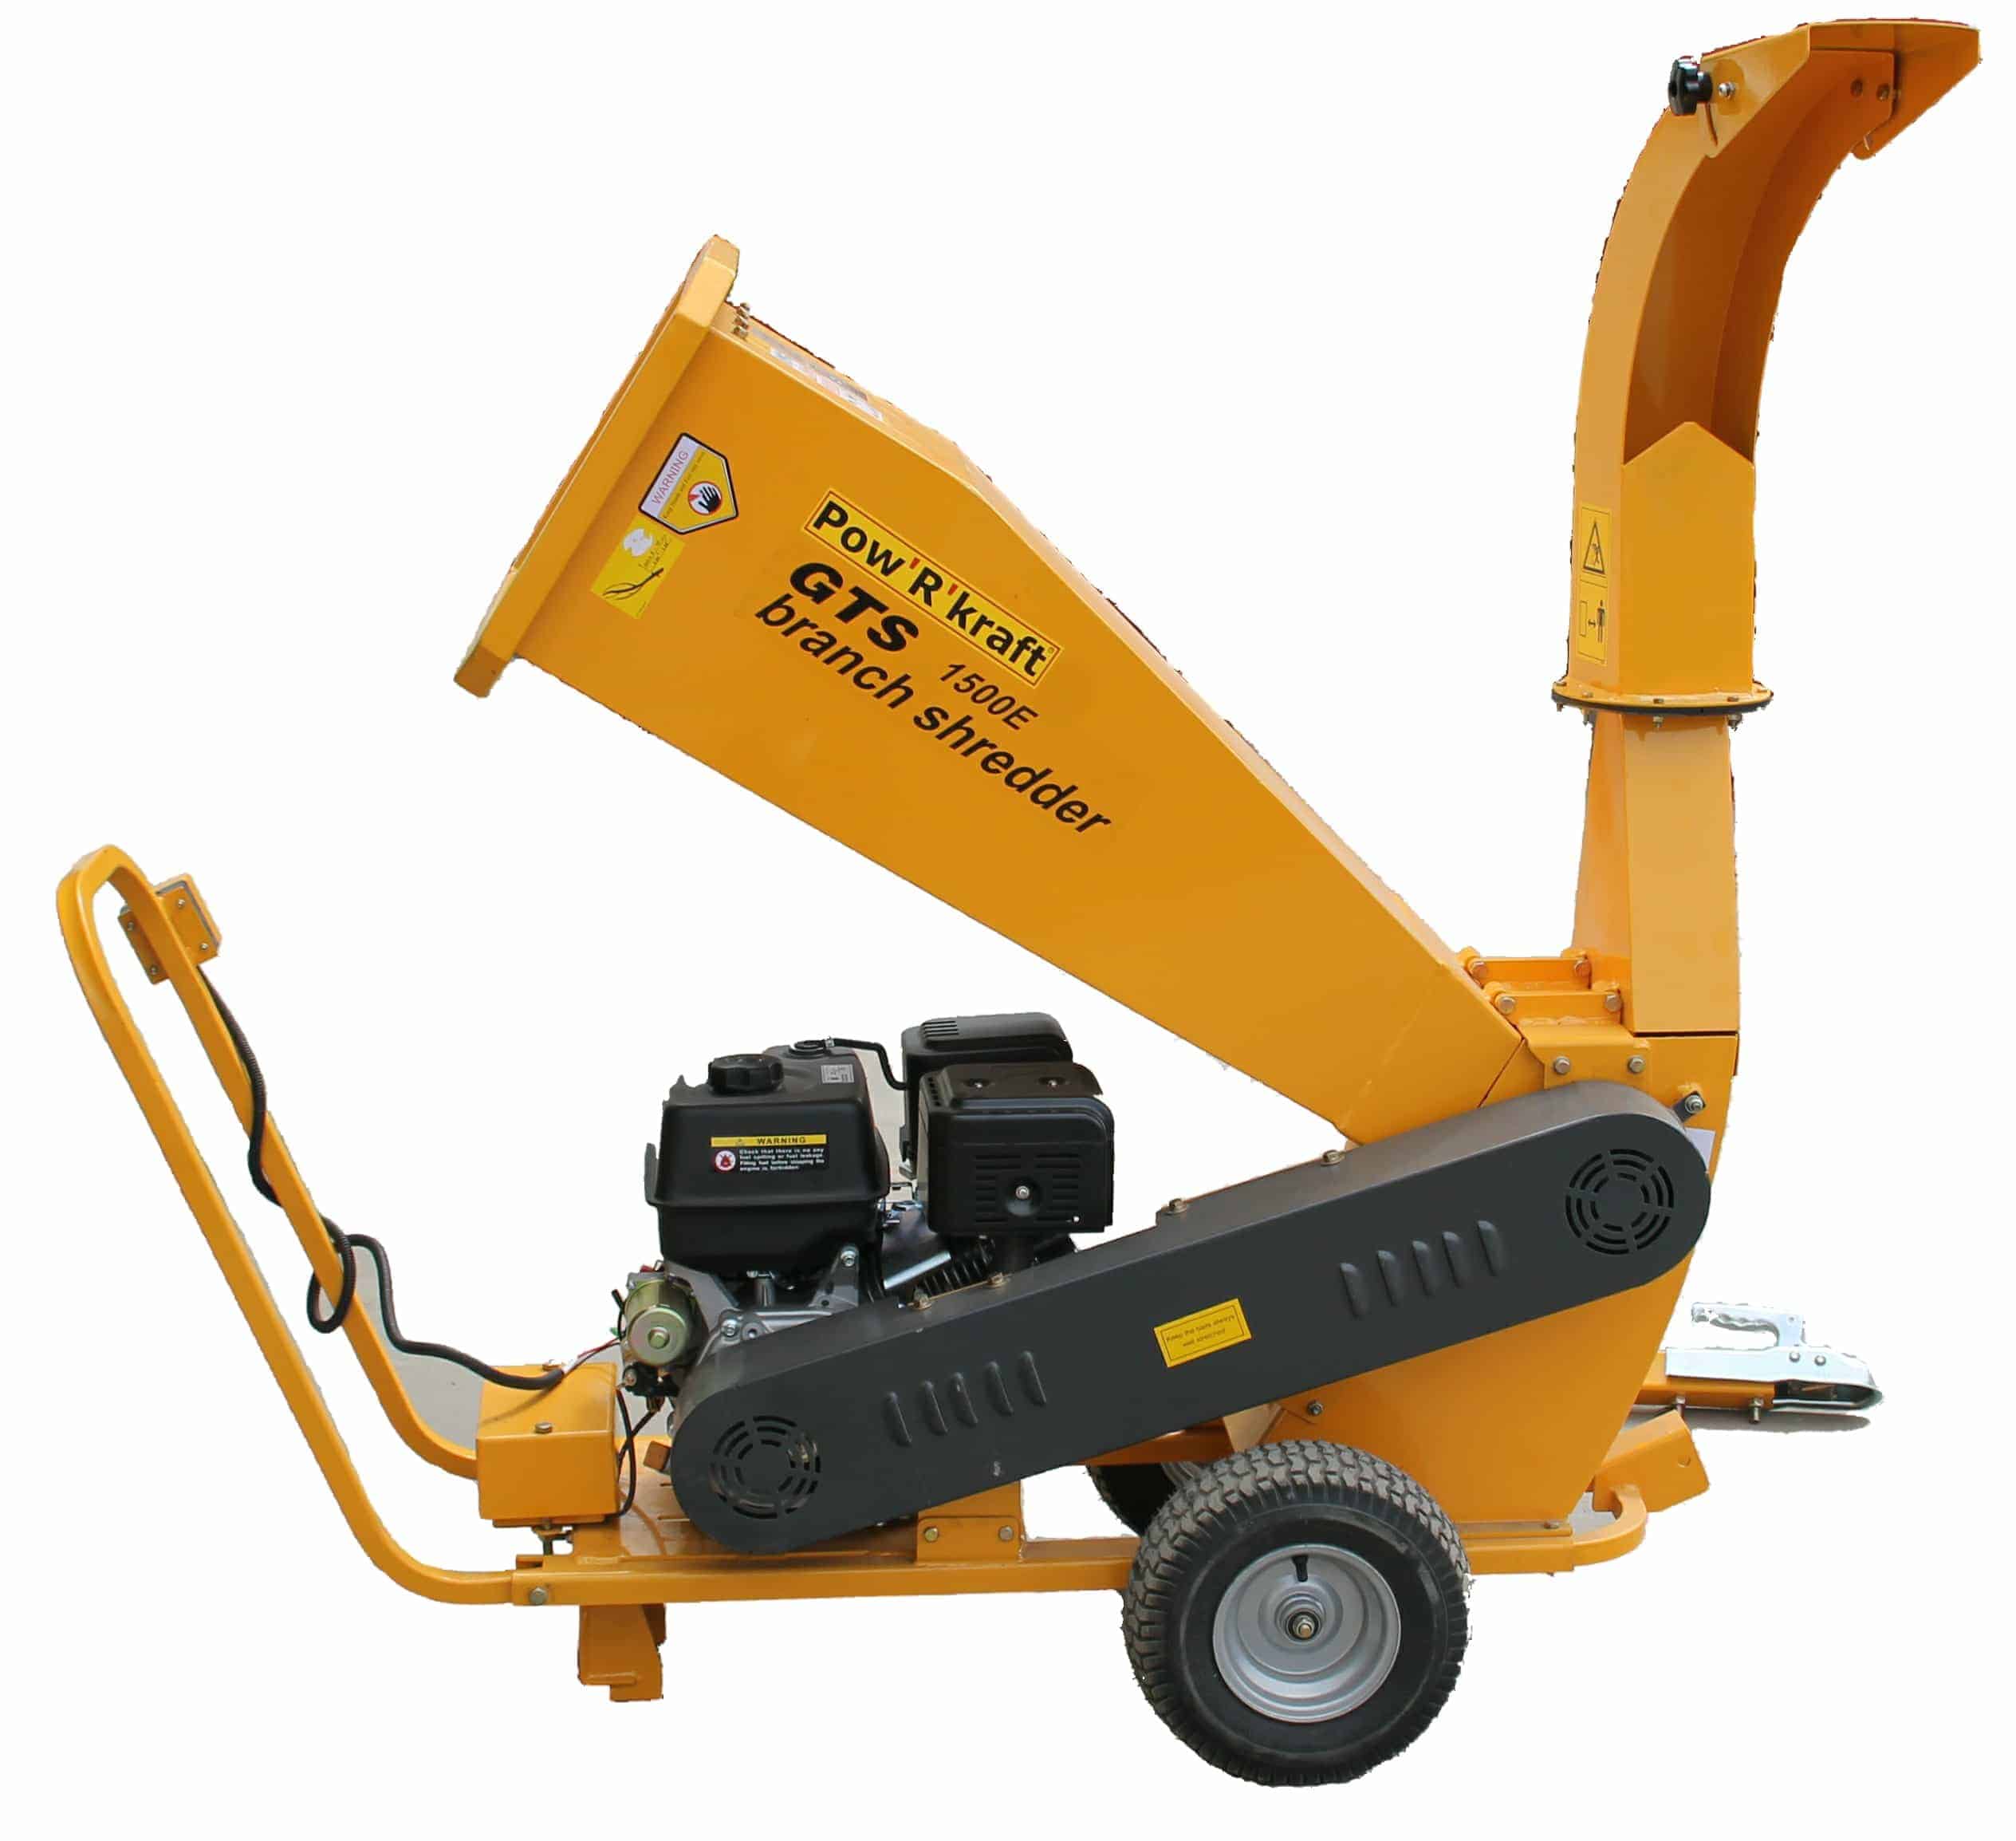 4 Towable Wood Chipper Pk Gts1500e Betstco Sales Parts And Service